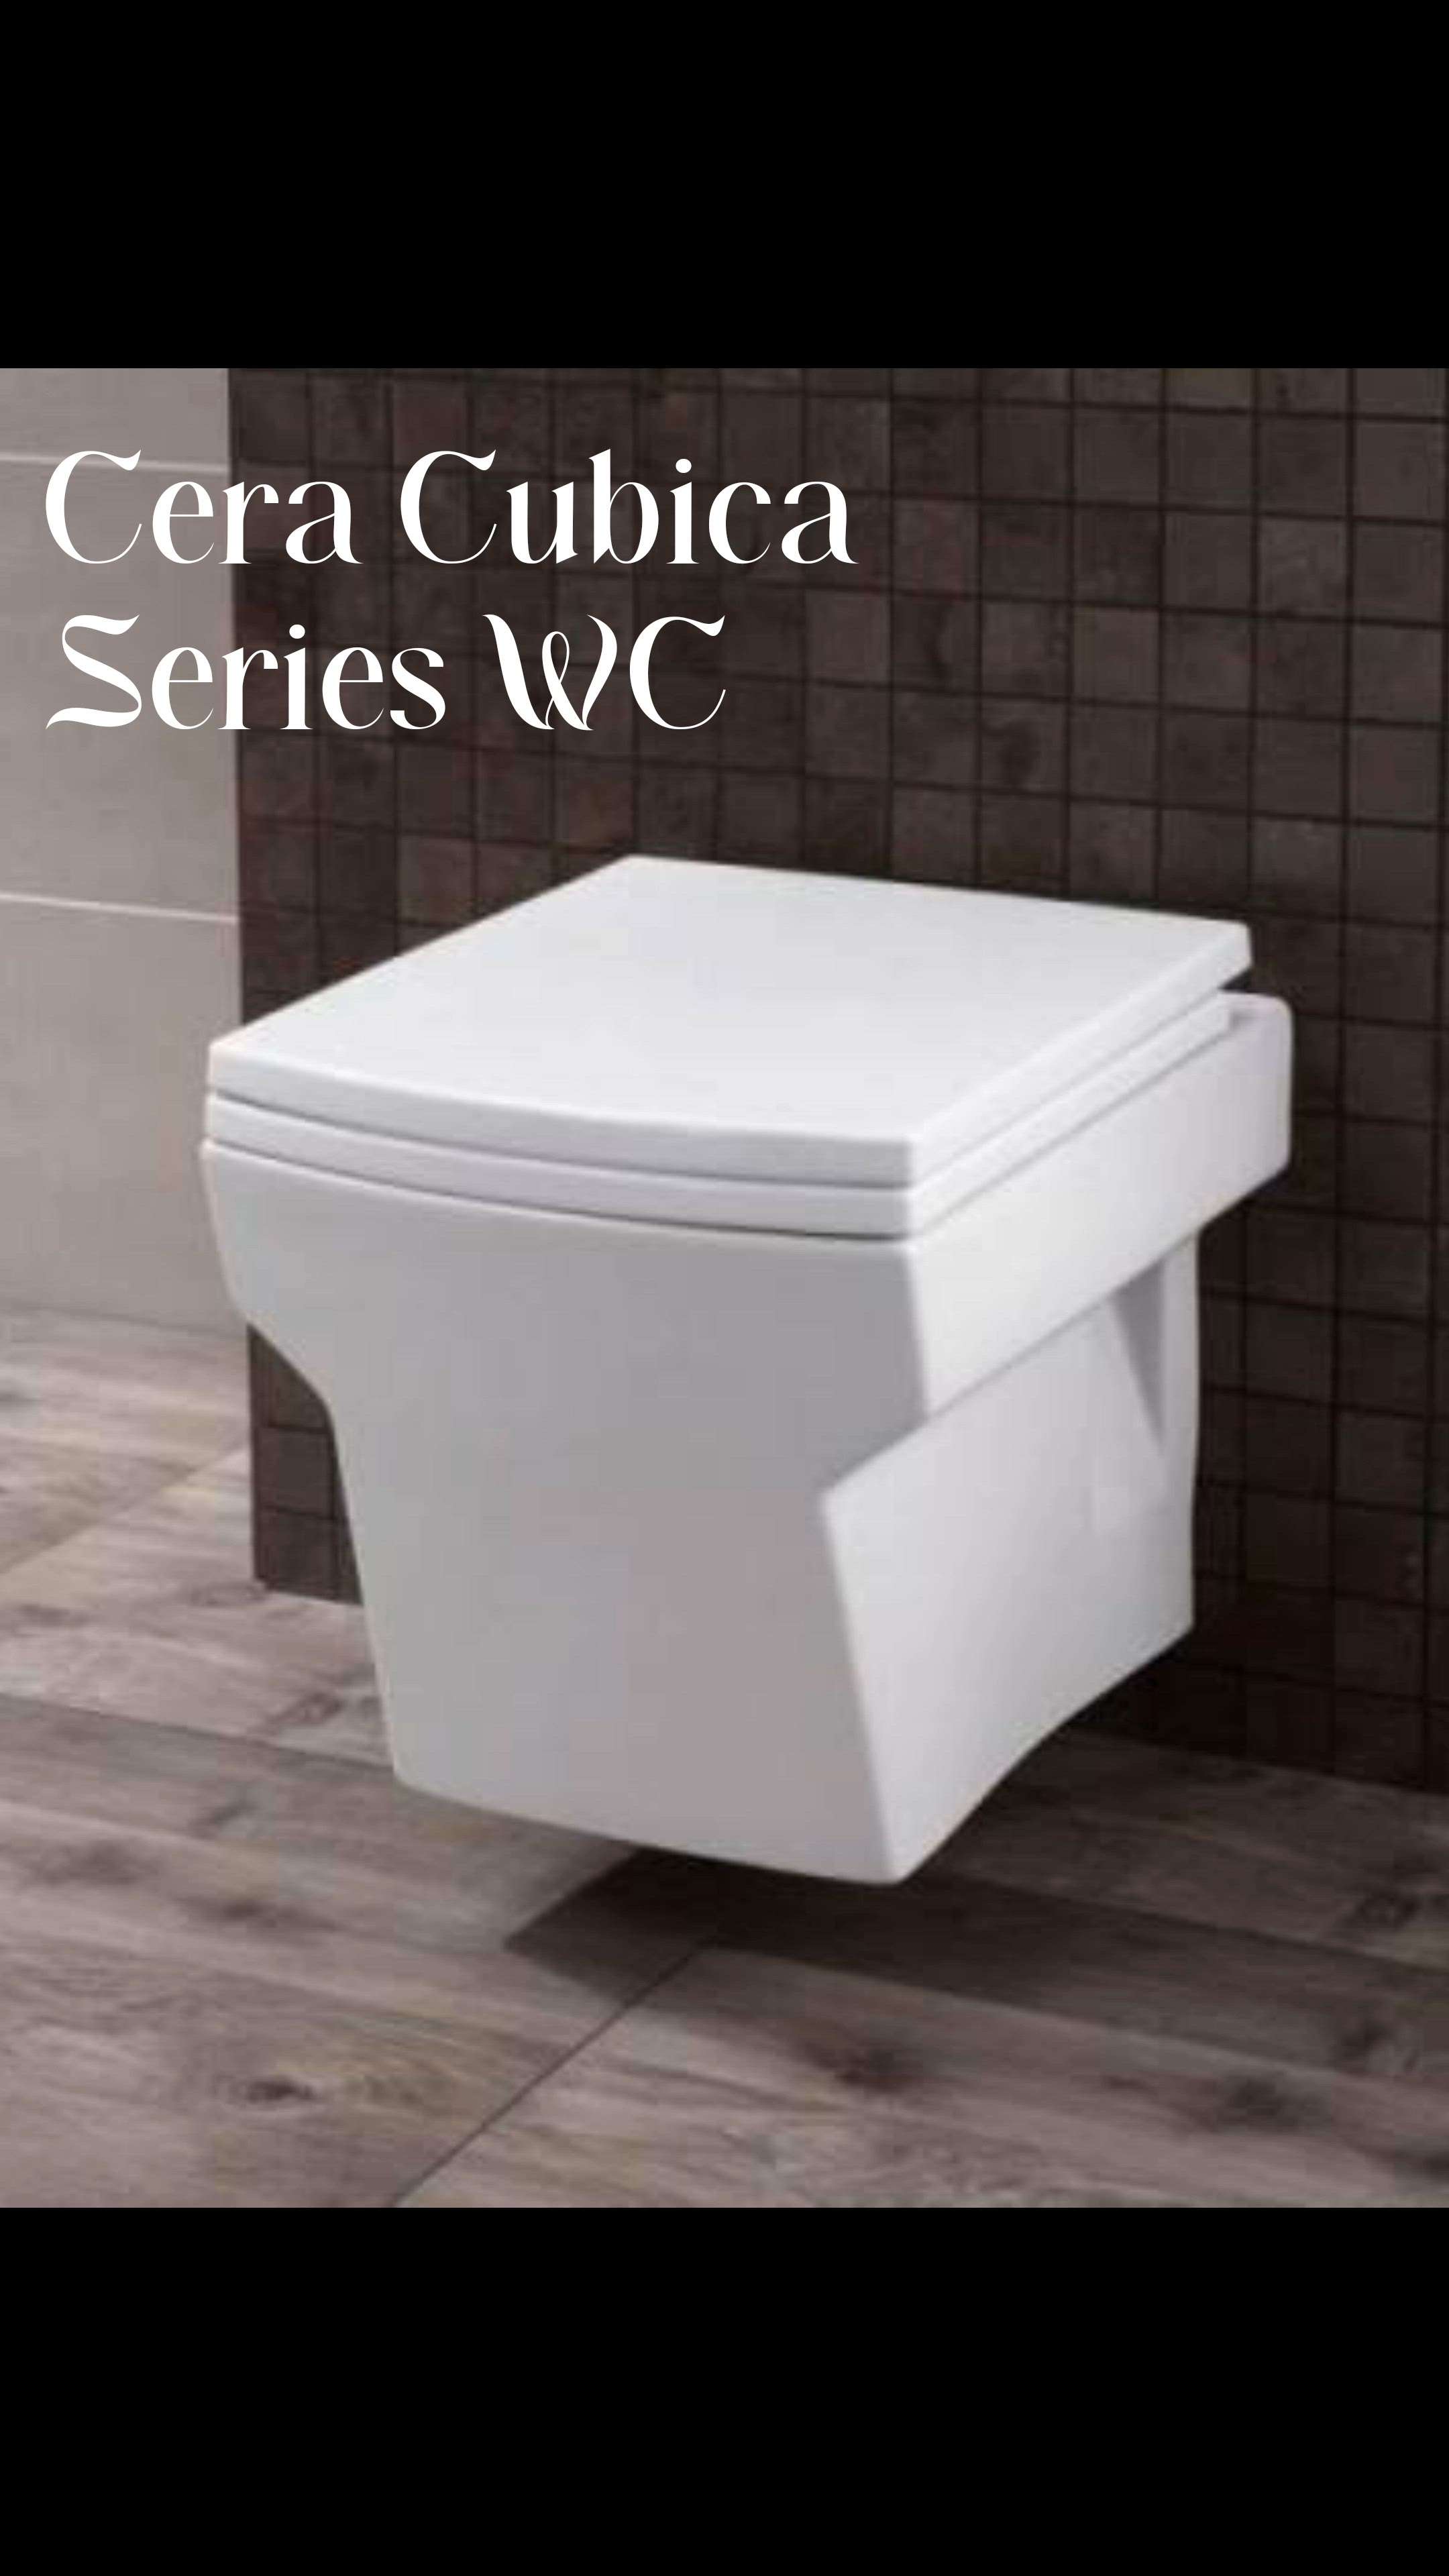 CERA WALL HUNG EWC
CATAGORY : WALL HUNG EWC
SERIES: CUBICA
COLOUR: SNOW WHITE
FEATURES : STRAIGHT LINE DESIGN, SQUARE BOWL, SLIM SEAT COVER, CONCEALED P-TRAP, GLOSSY FINISH.

 #cera #ewc #cubica #moderntoilet #sanitaryshopping #bestprice #bestbathrooms #wallhung #kolo